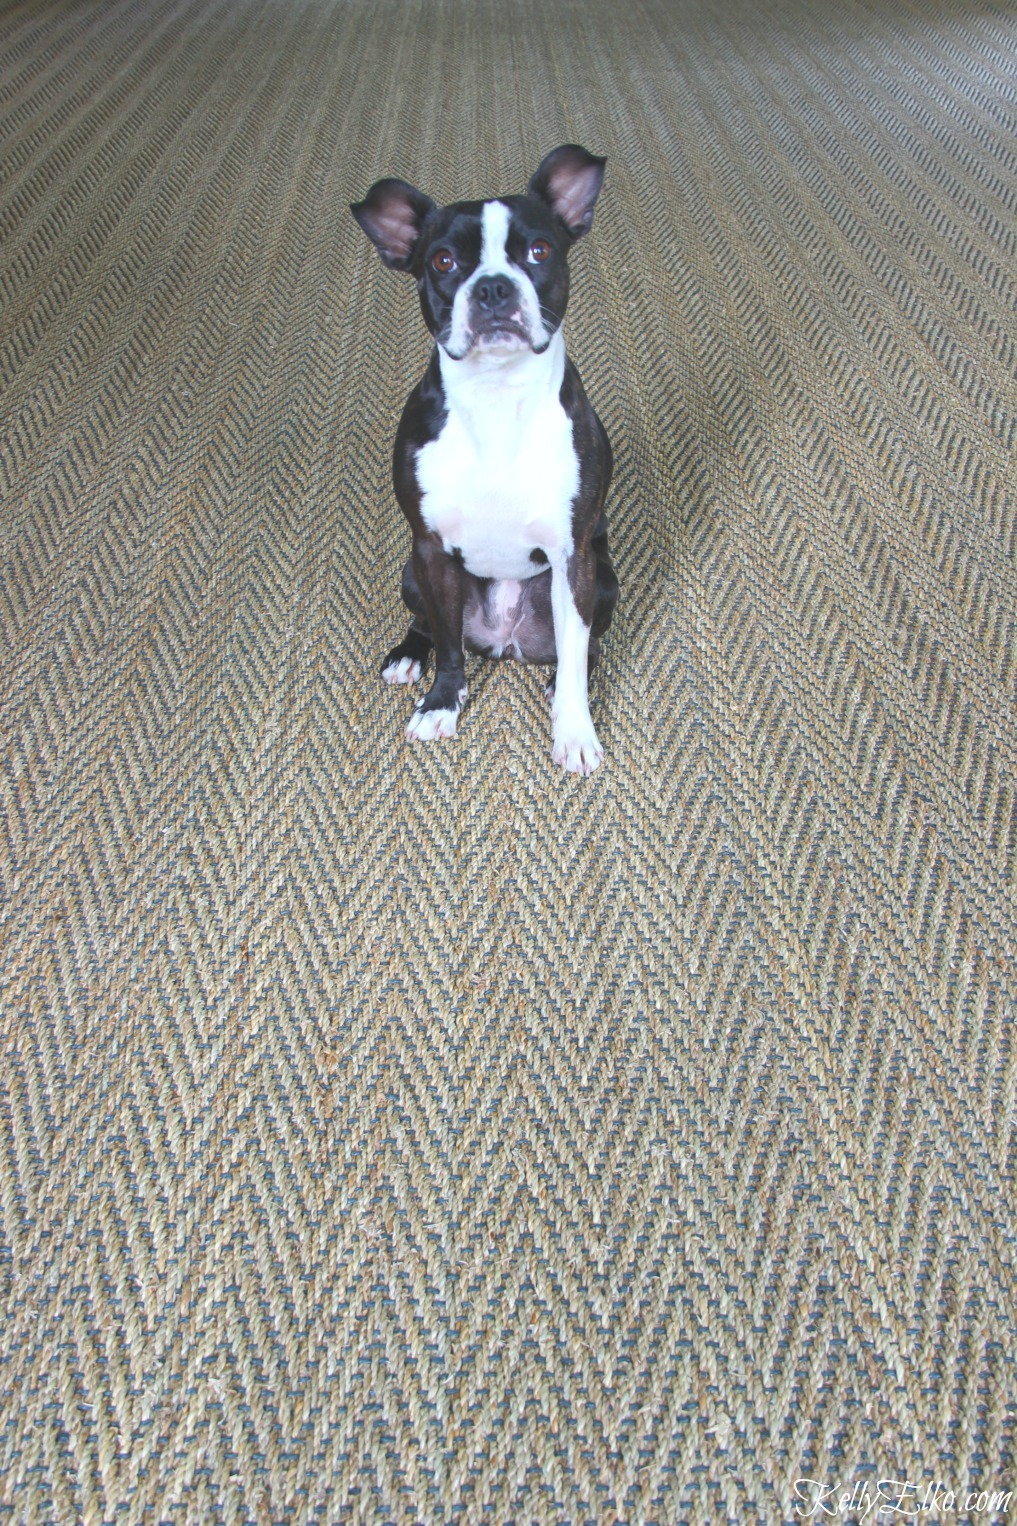 Boston Terrier on a seagrass rug - the perfect rug if you have pets! kellyelko.com